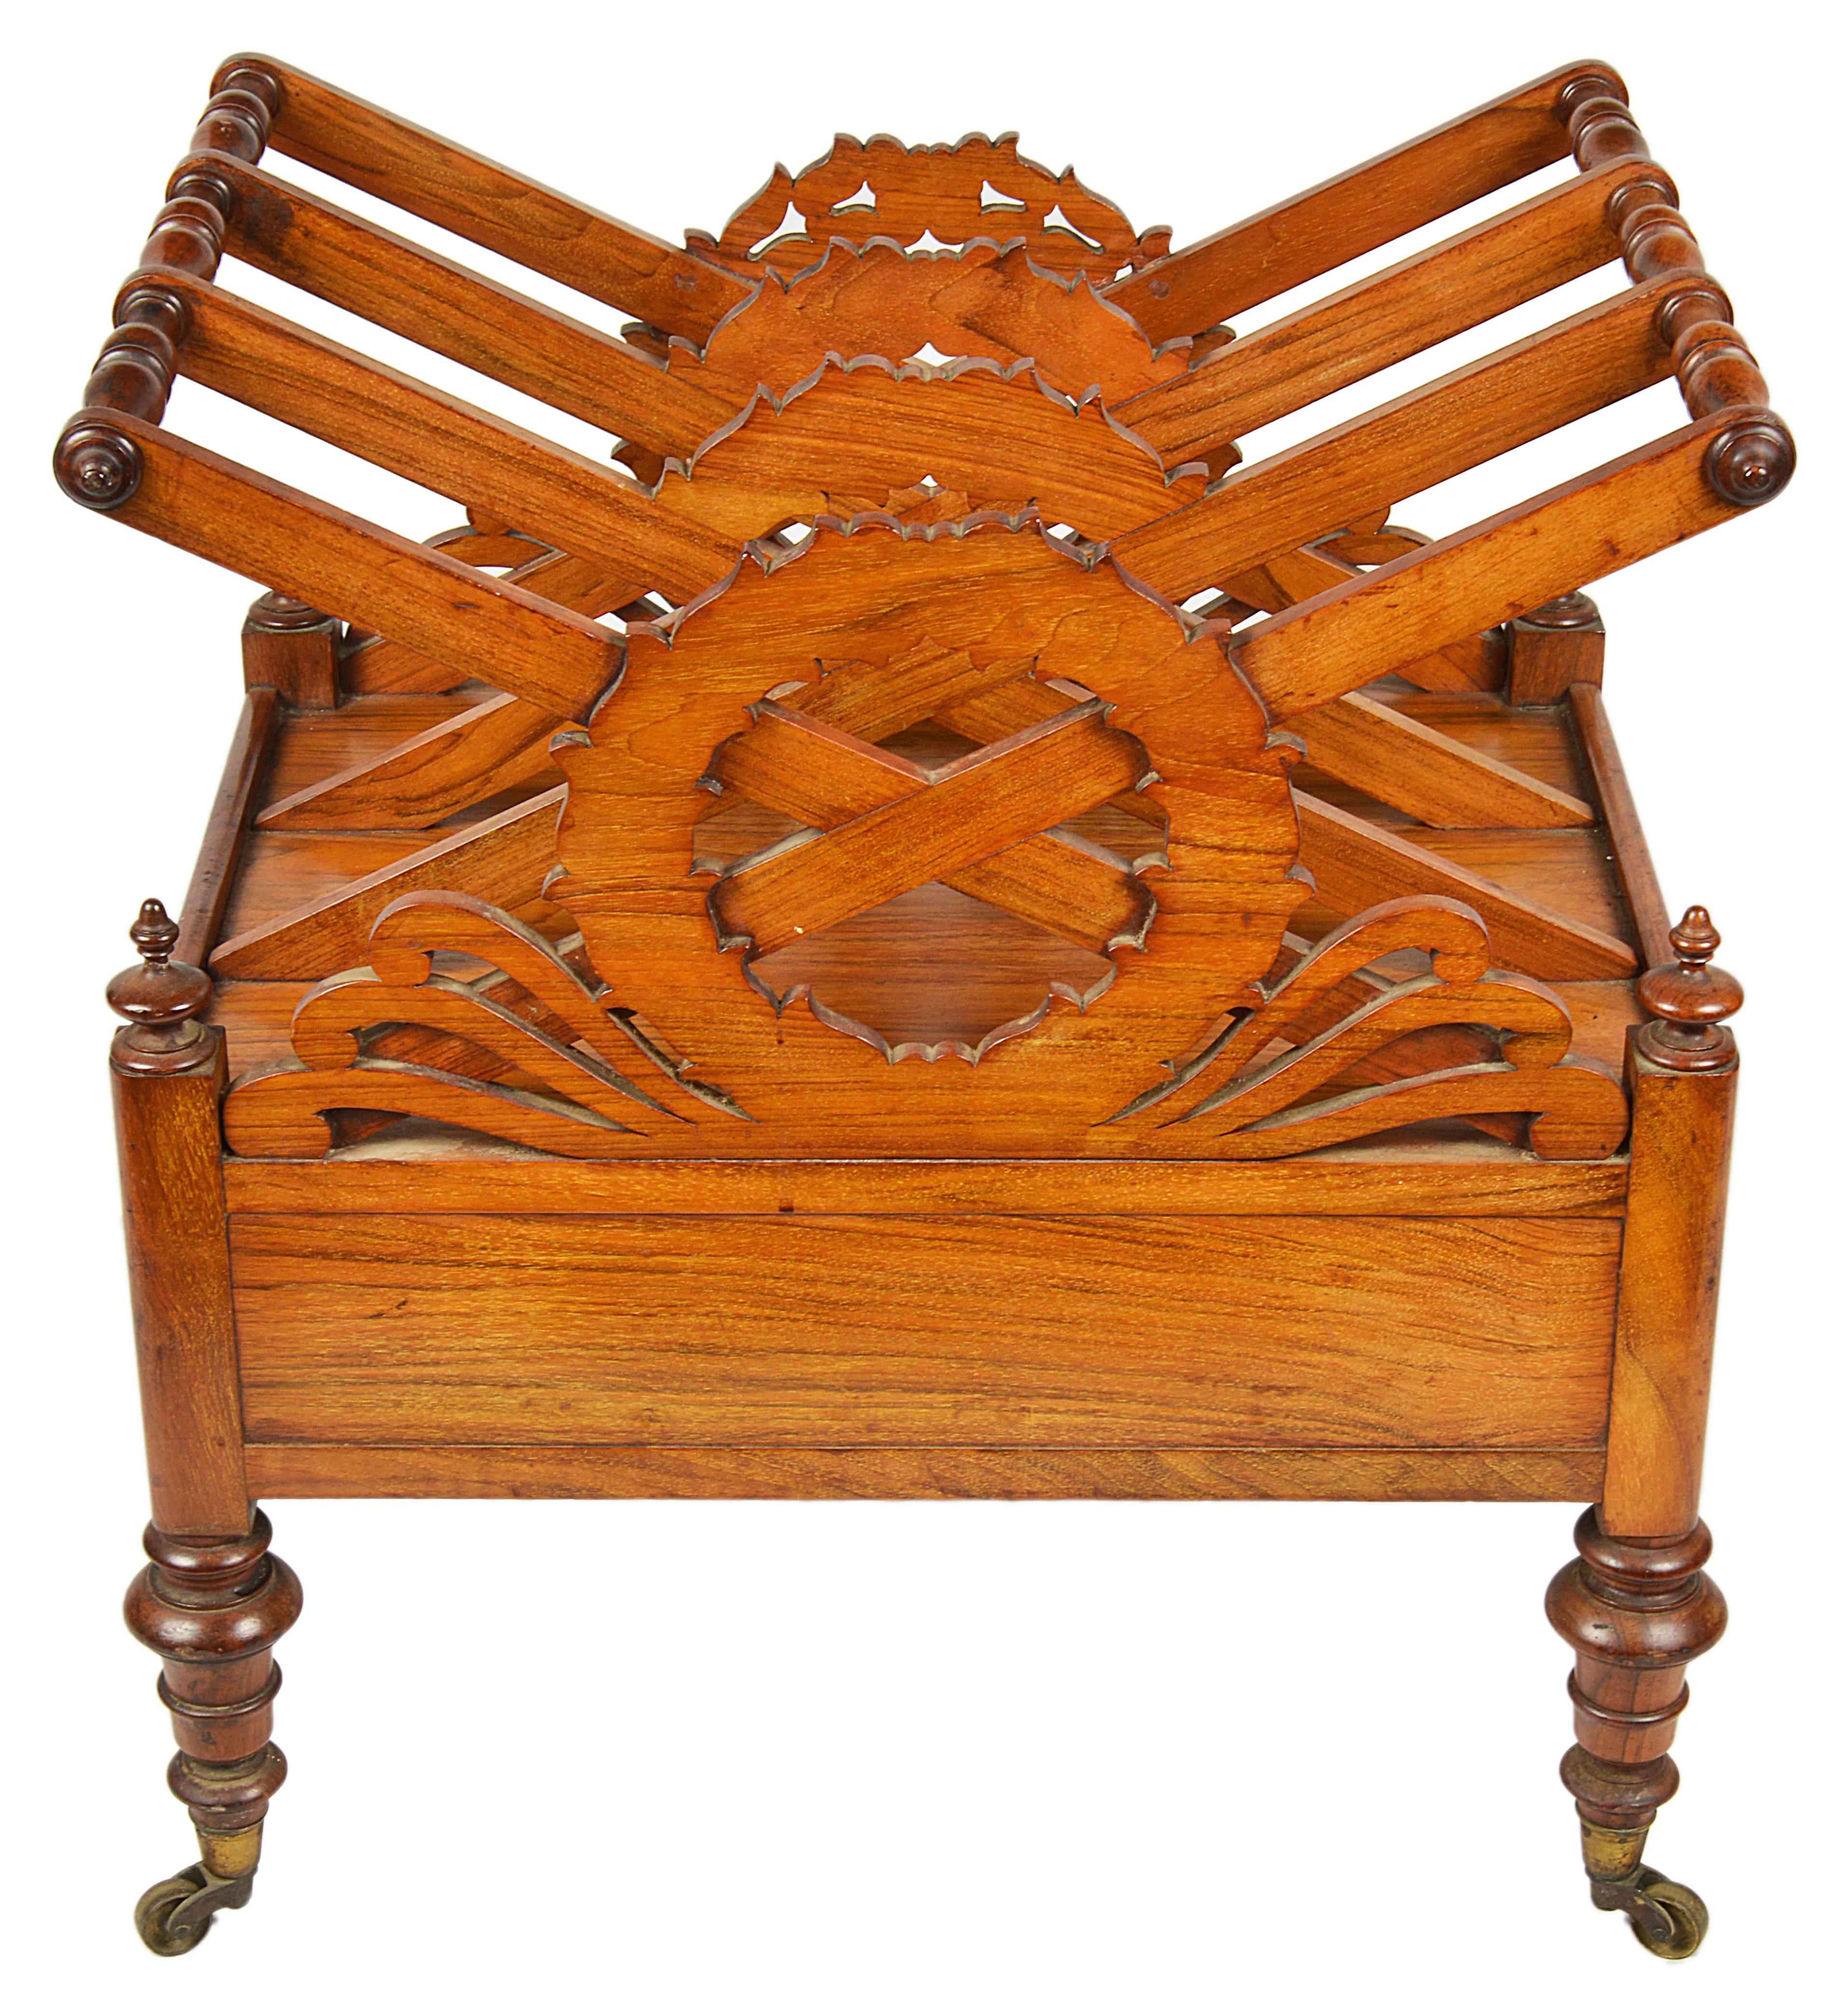 A stylish Regency canterbury, with three divisions united by turned spinials, and a carved laurel wreath to the front, which is silhouetted on the divisions behind. The wreath flanked with scroll carvings and turned finials to all four corners above